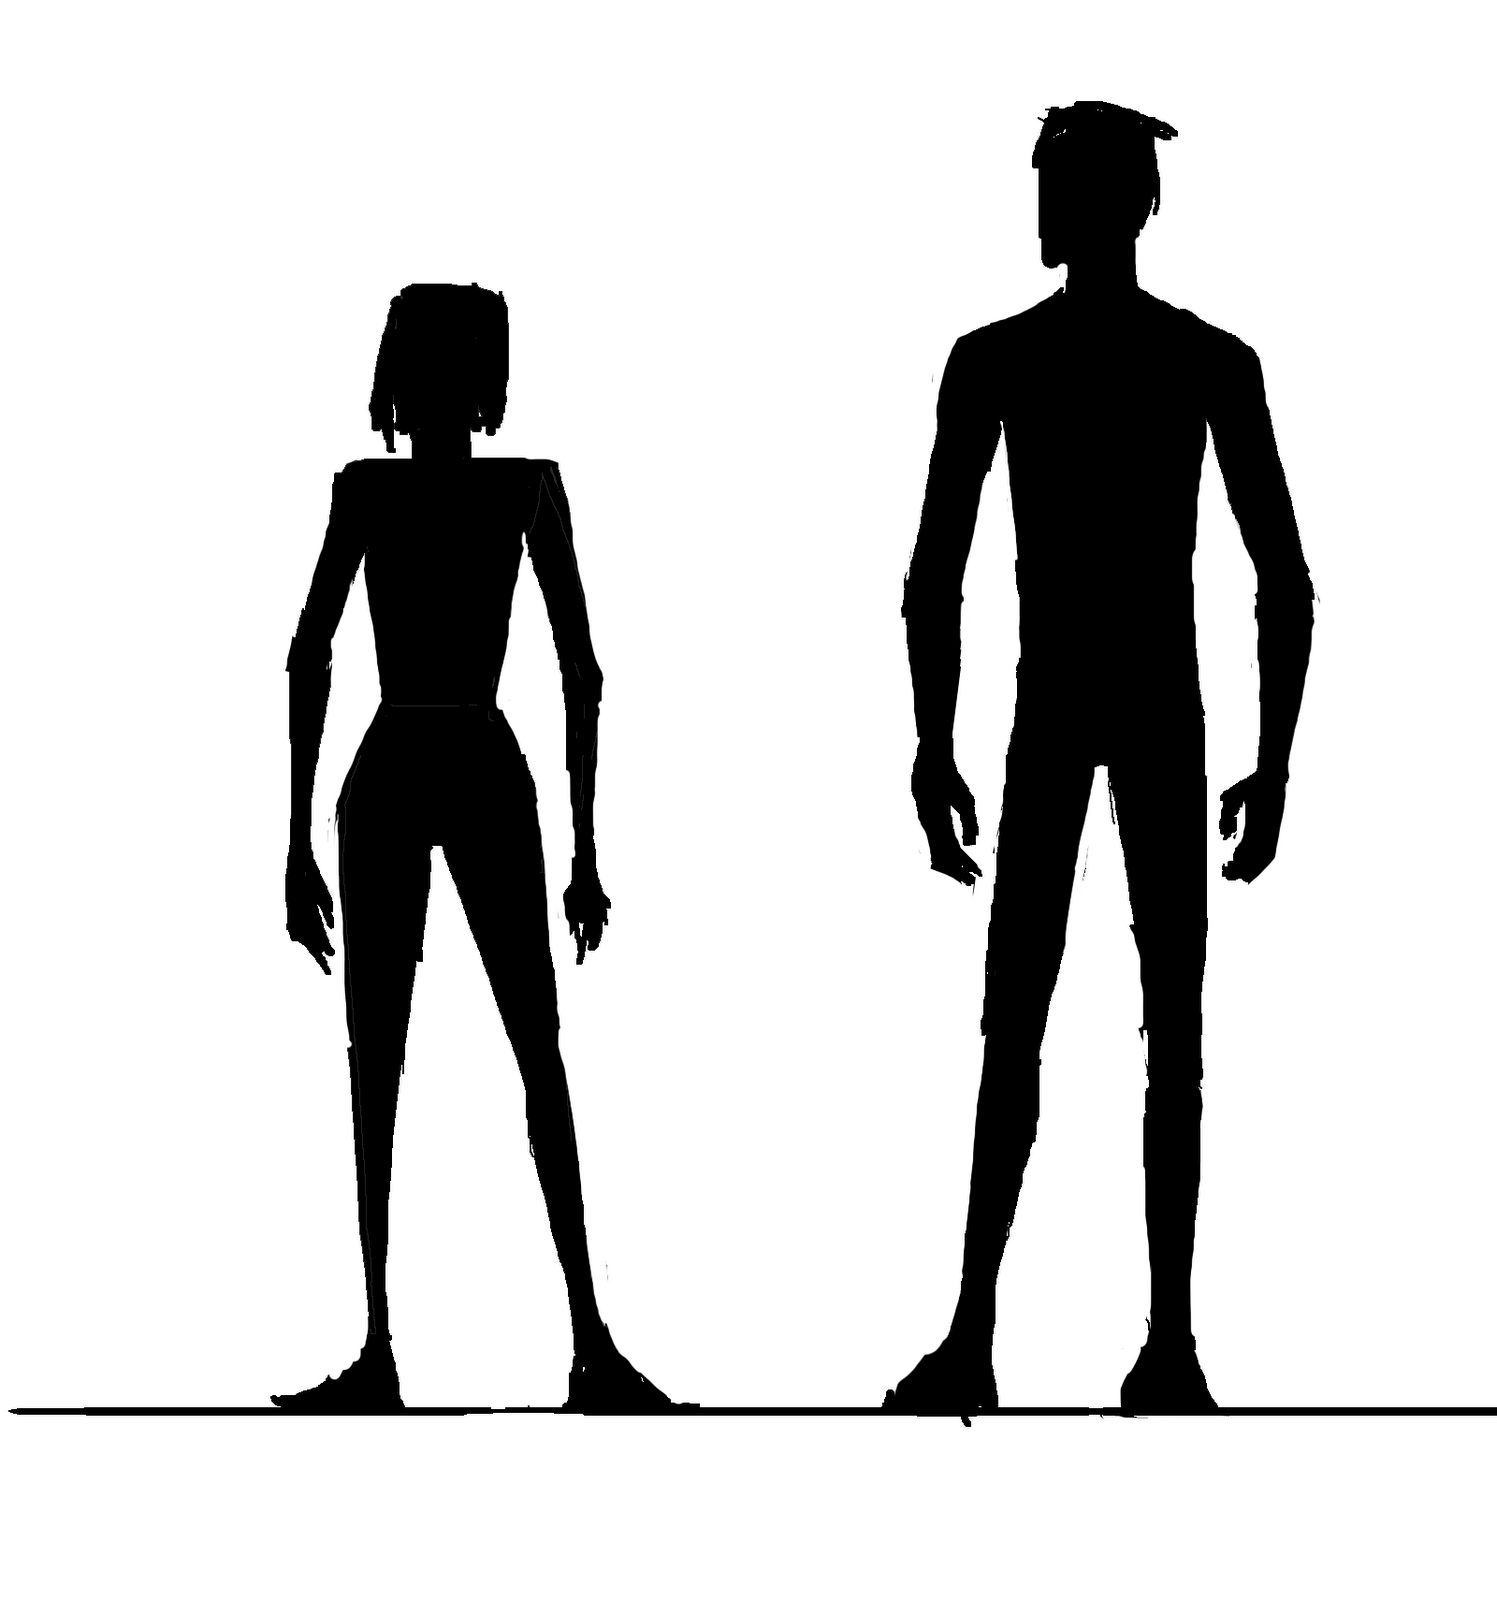 Image - Basic body shape silhouette.png - Truckload Inc. Wiki